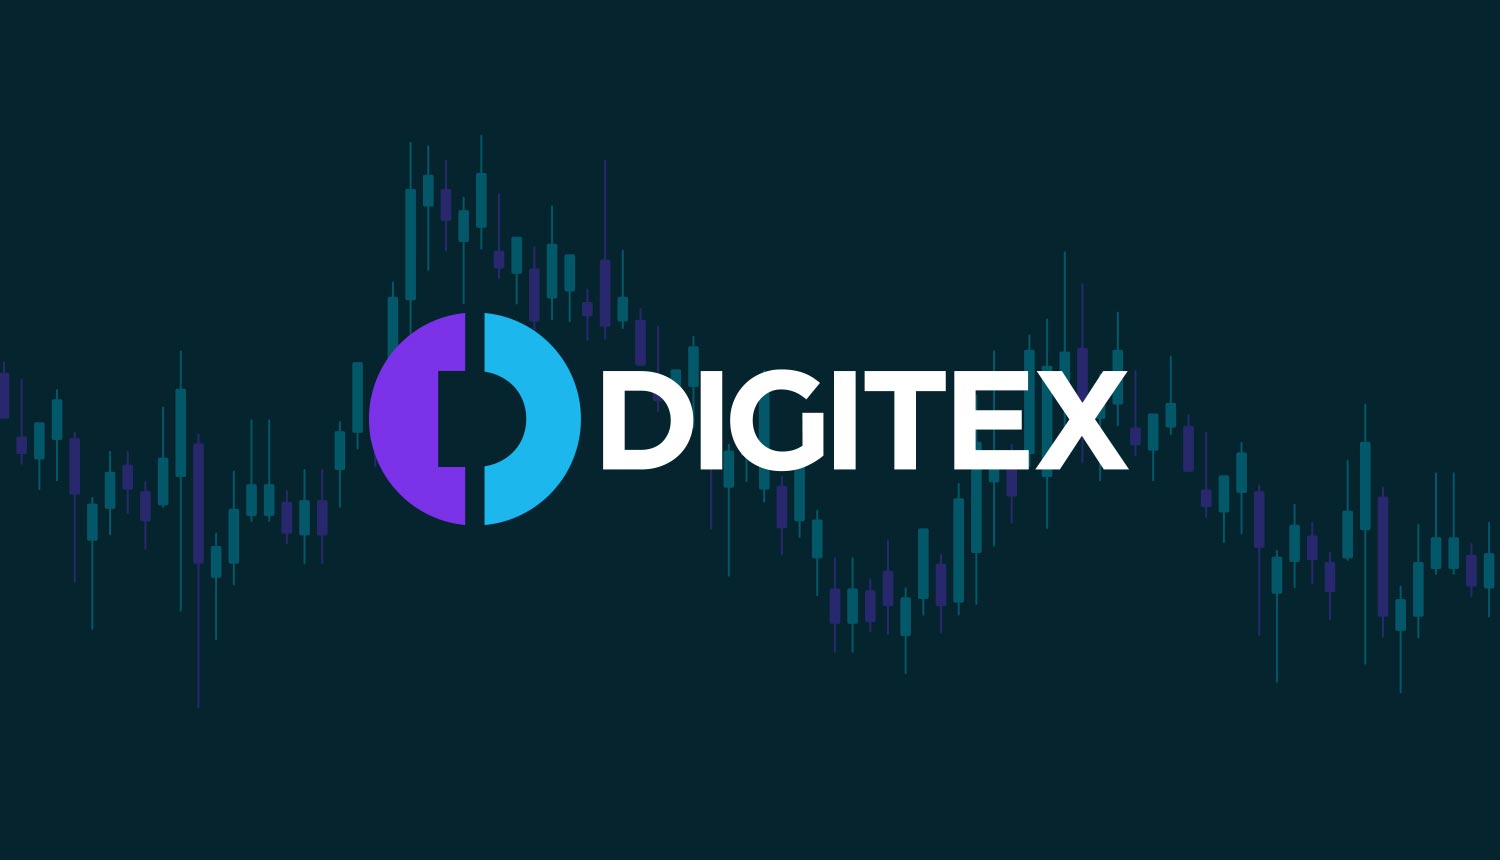 Digitex Futures Price Drops by 20% Across the Board